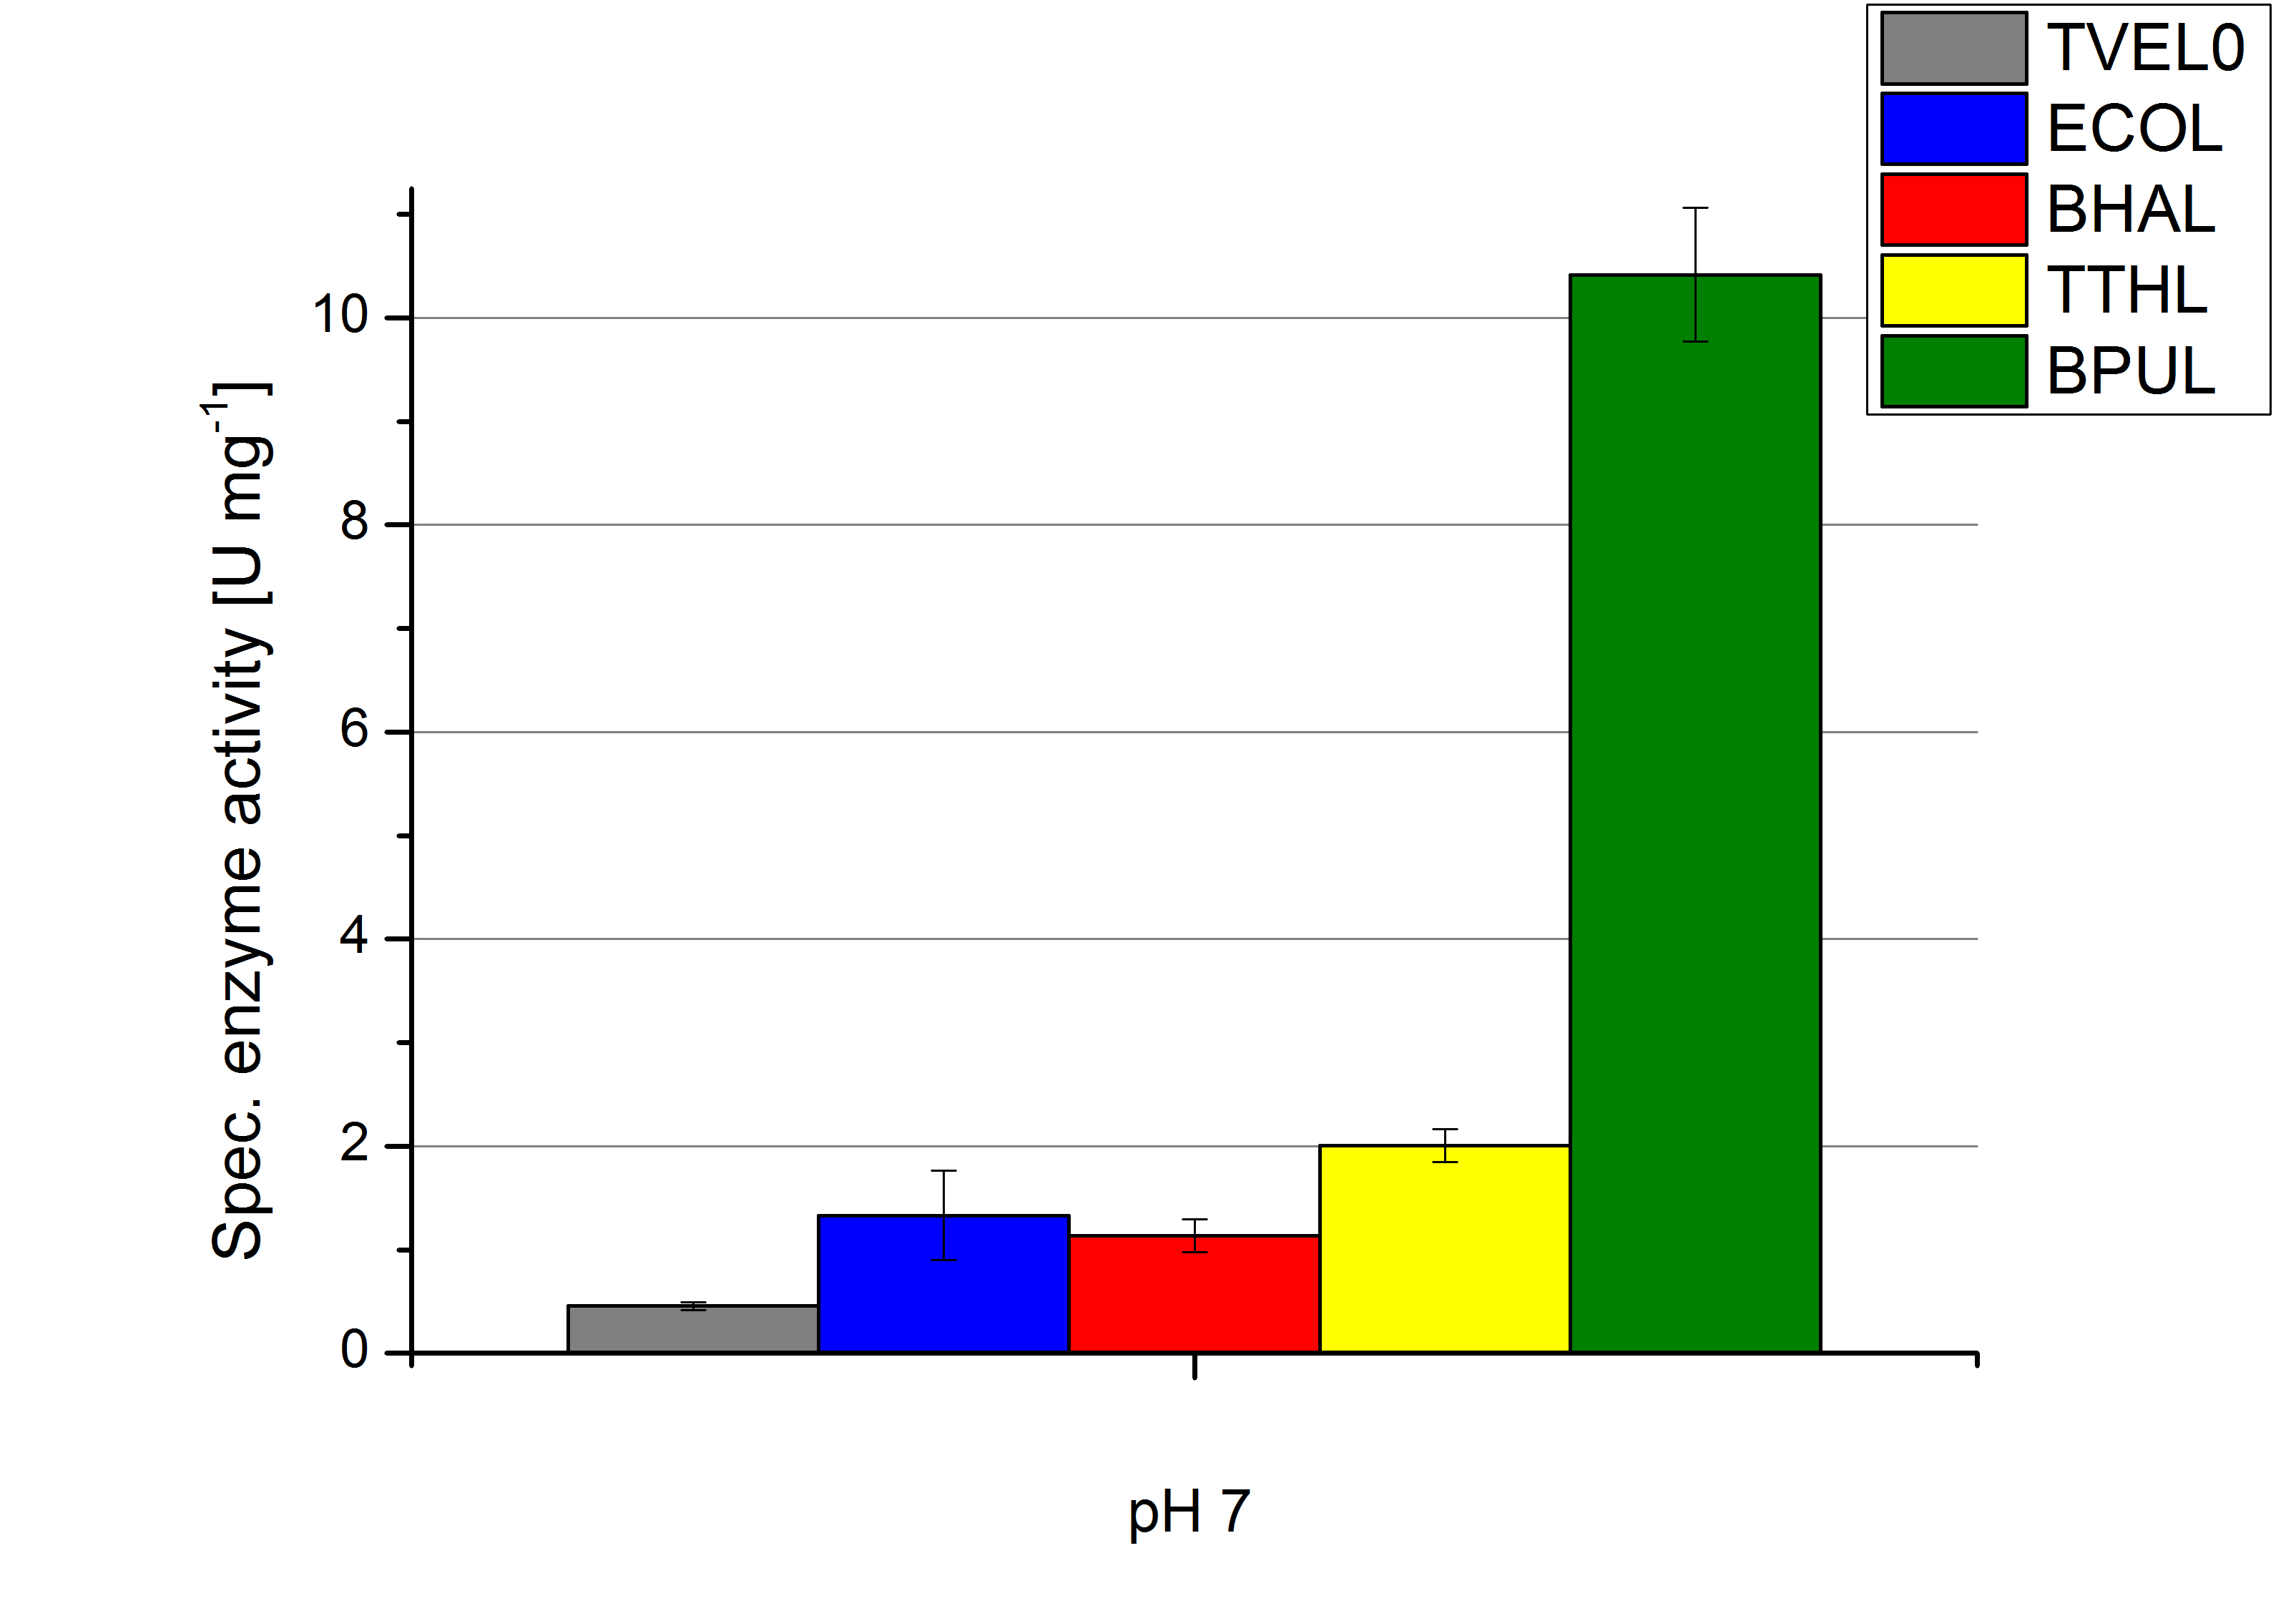 Comparison of our produzed enzymes and TVEL0 regarding their activity in a pH of 7. BPUL clearly shows the highest specific enzyme activity of 11 U mg-1.